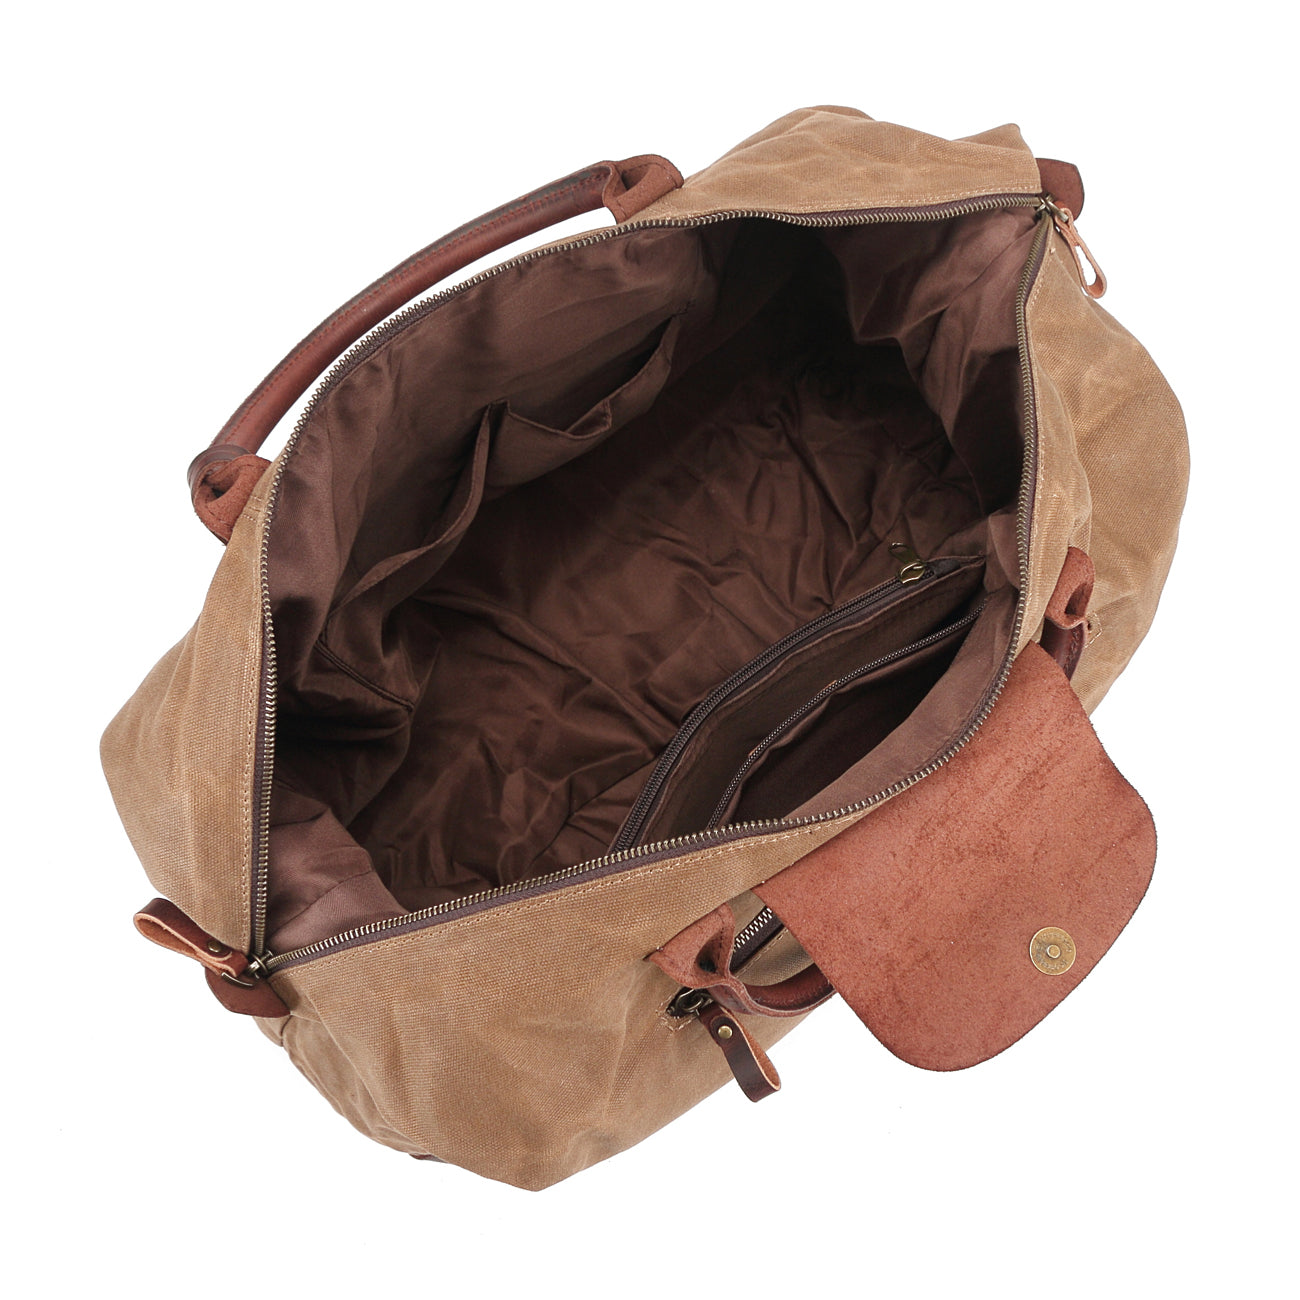 functional mens carry-on bag